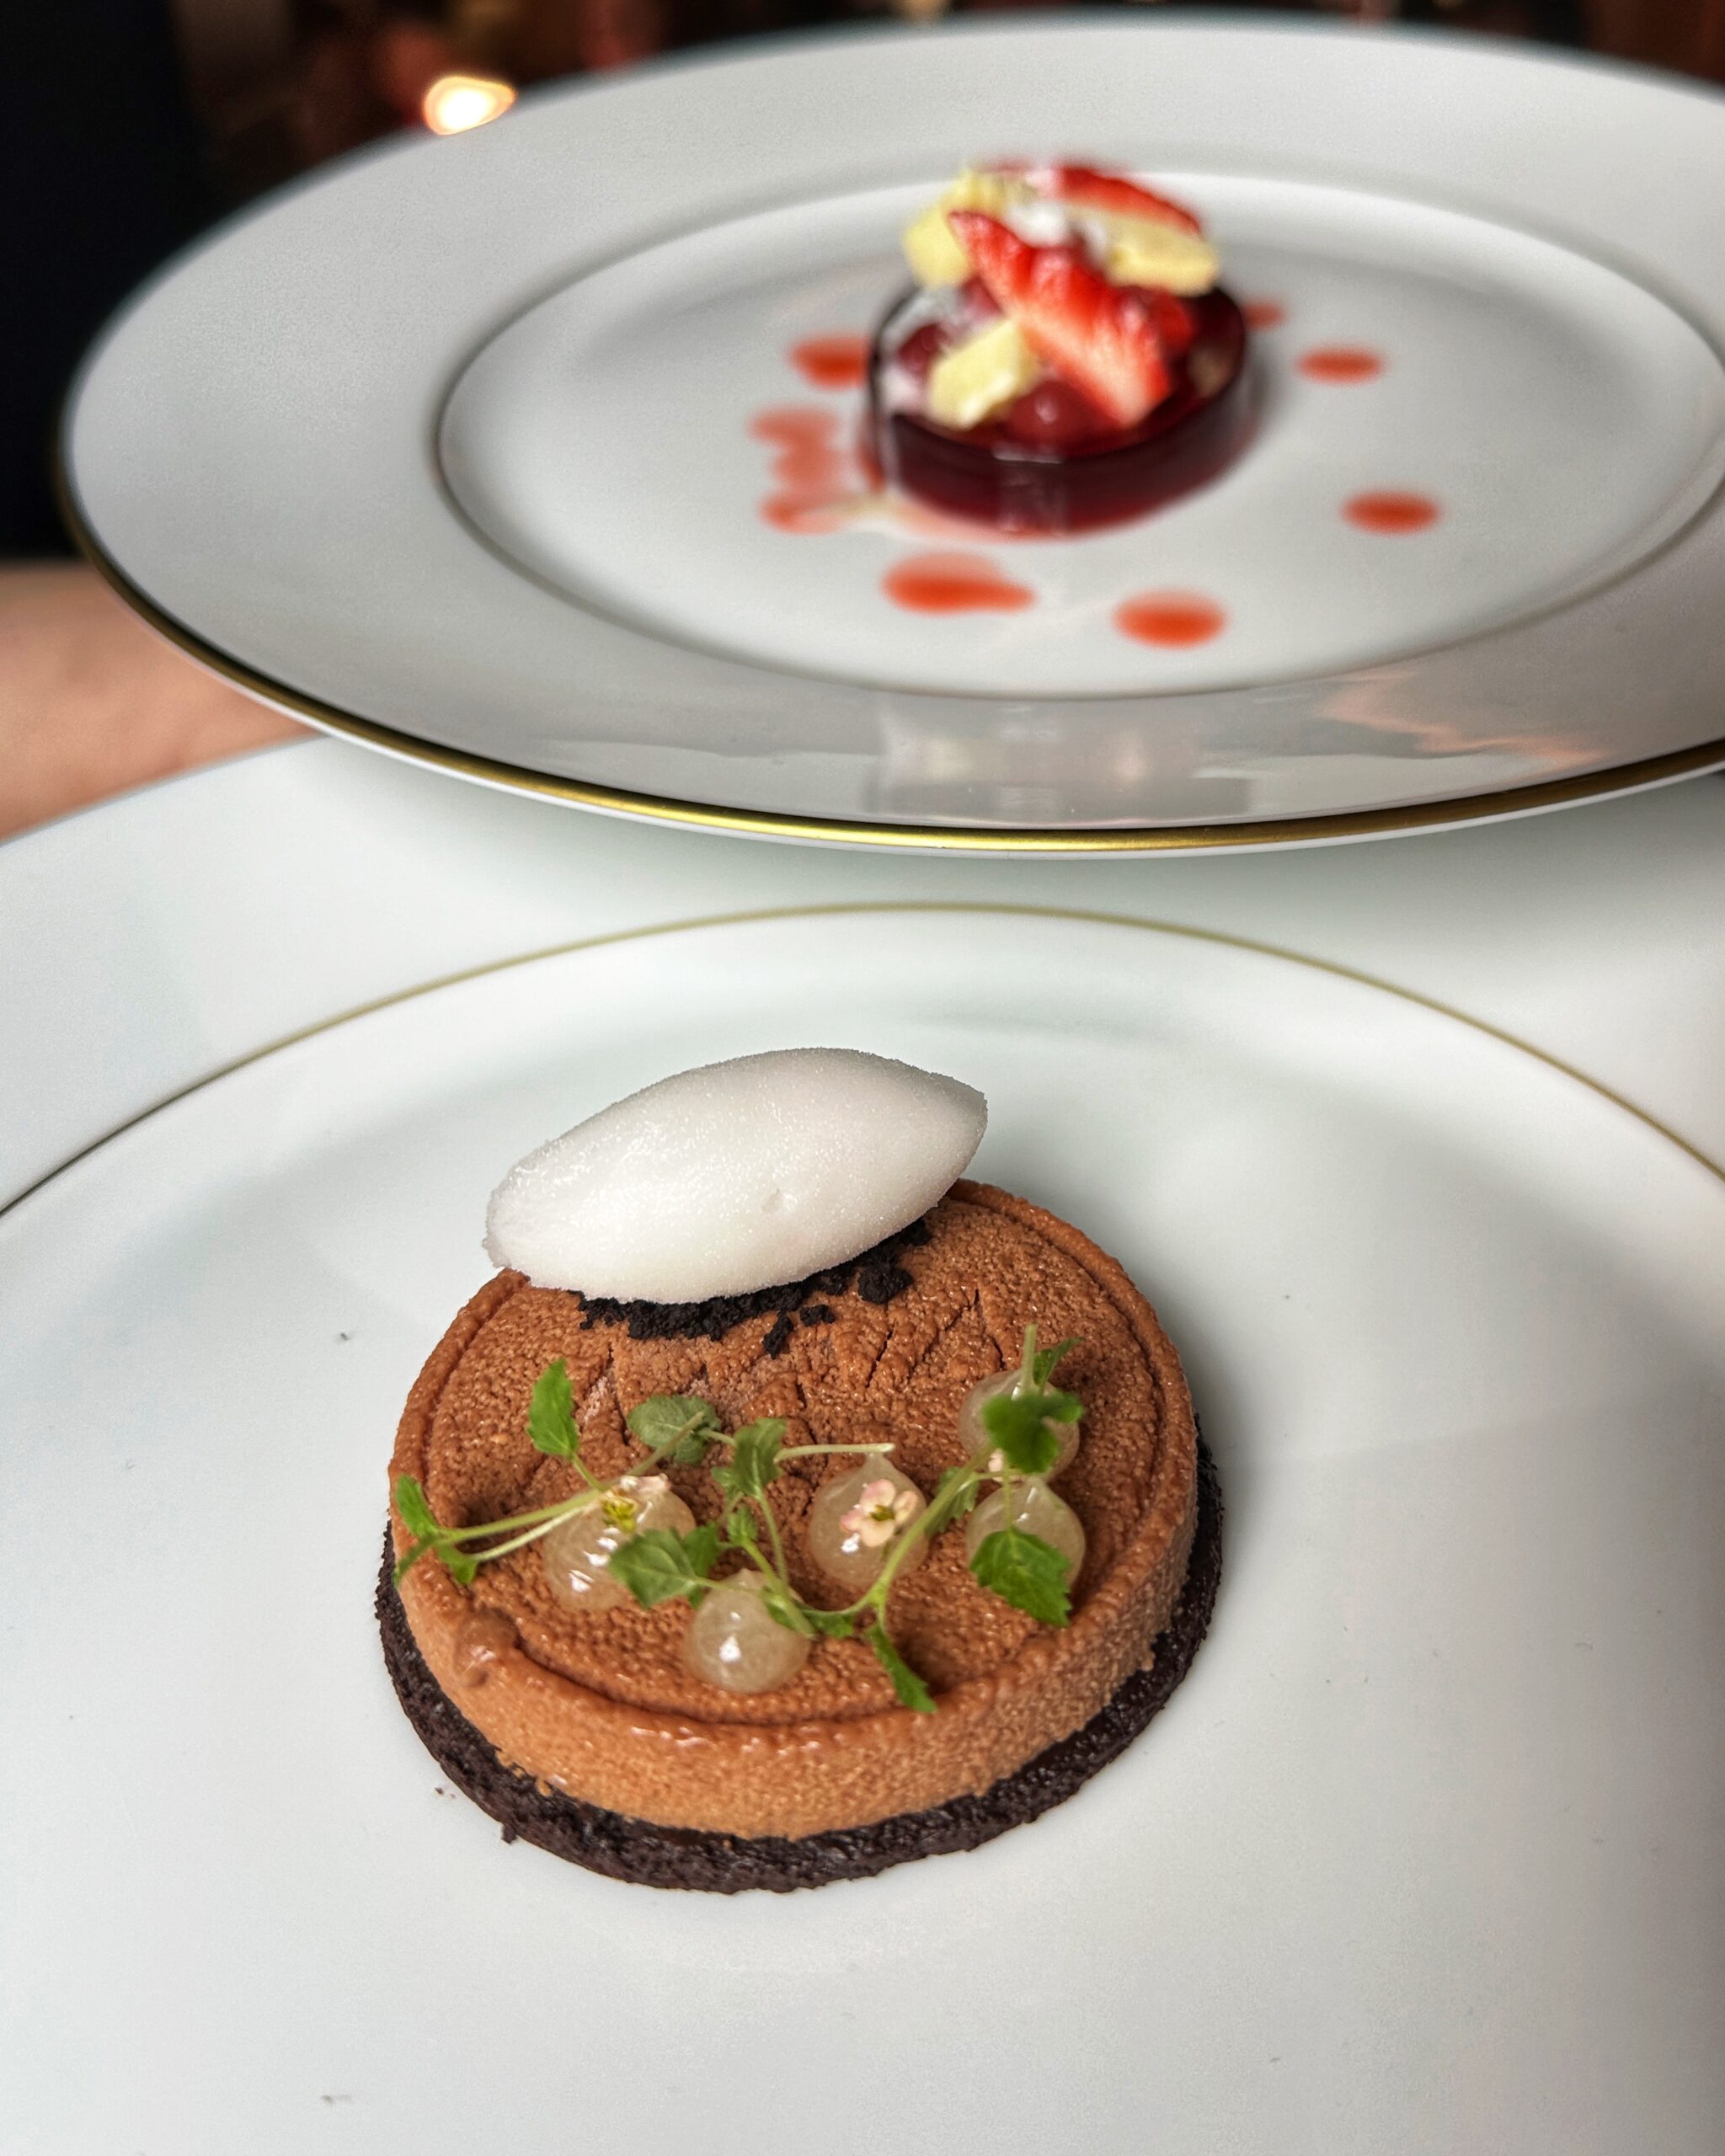 Desserts at Maya, which has been added to the Michelin Guide